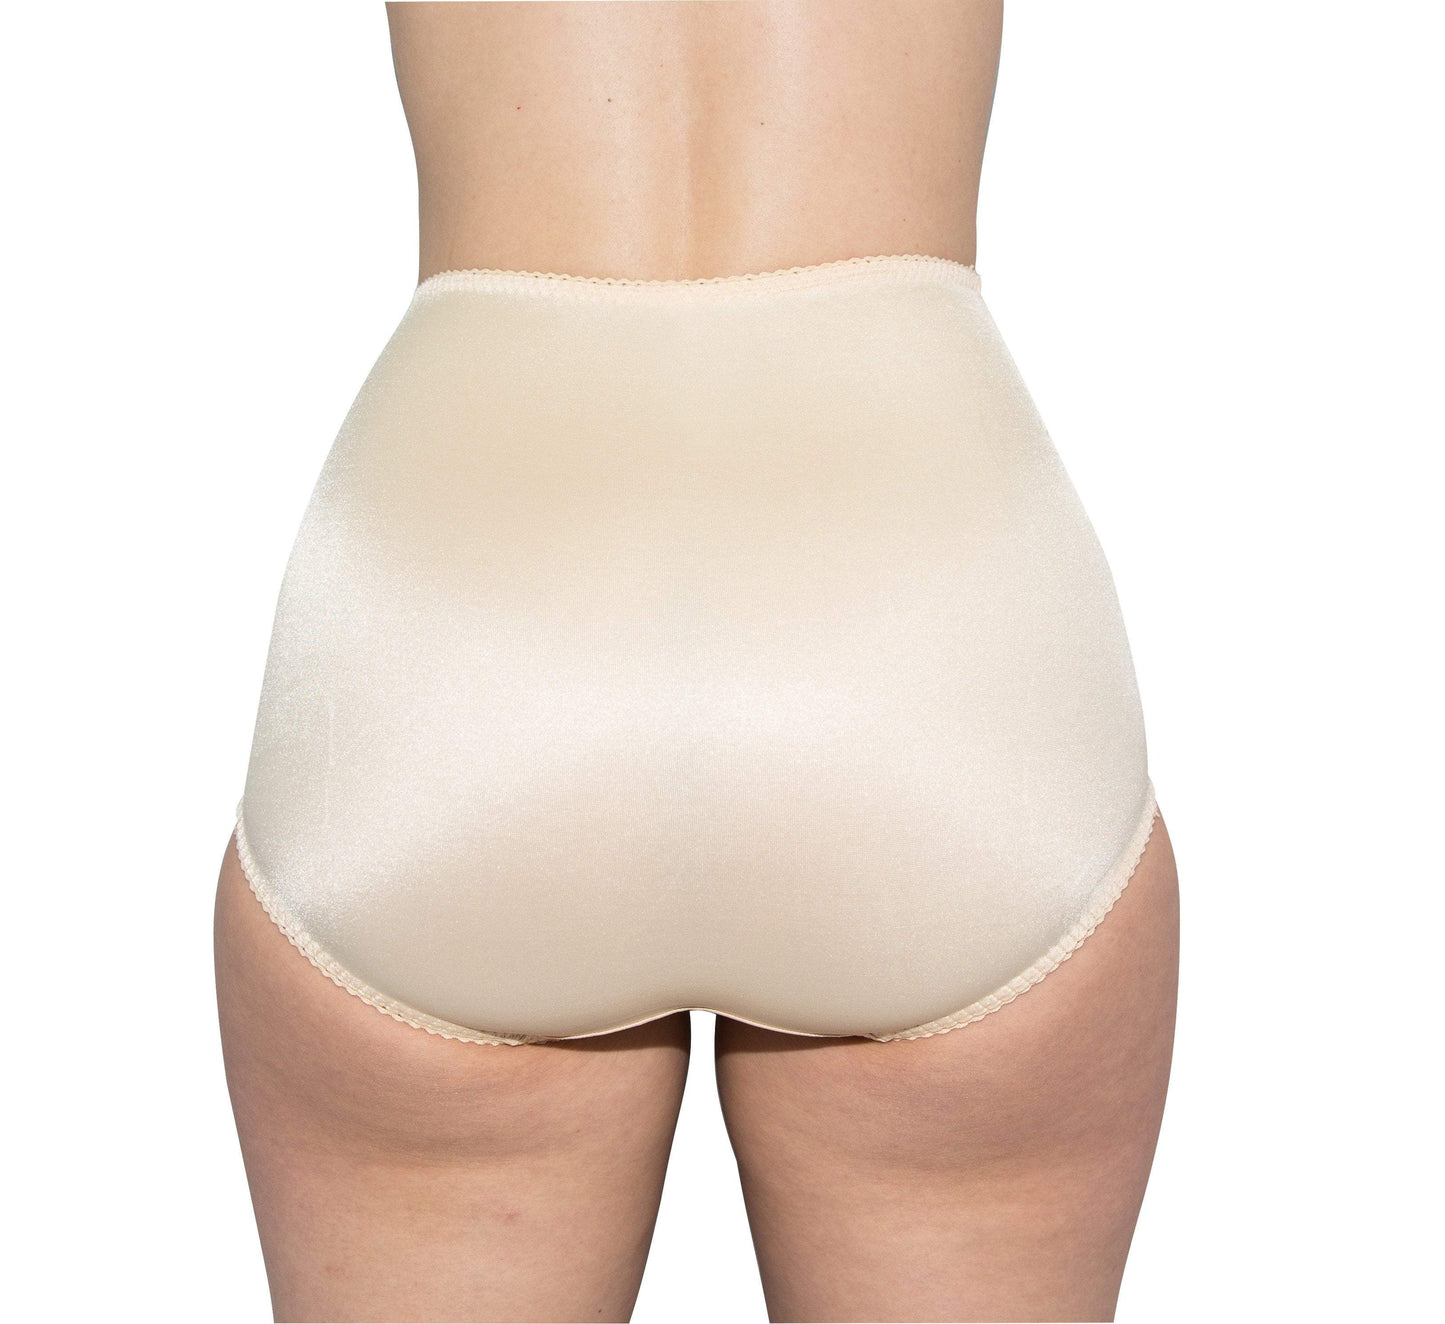 Style 910 | Panty Brief Light Shaping